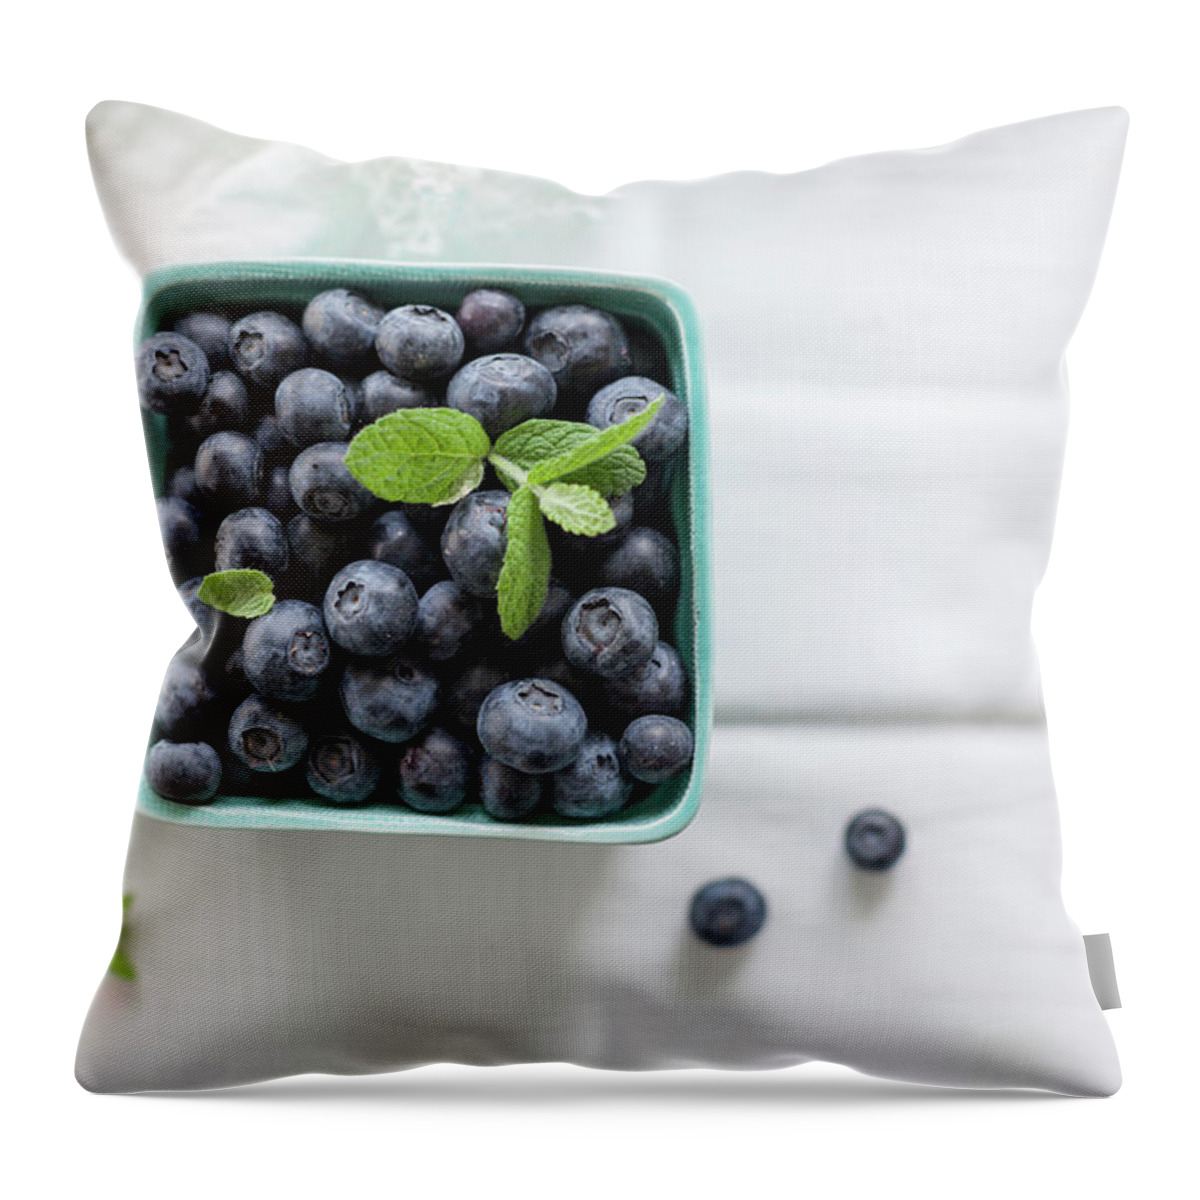 White Background Throw Pillow featuring the photograph Blueberries In Bowl by Ingwervanille